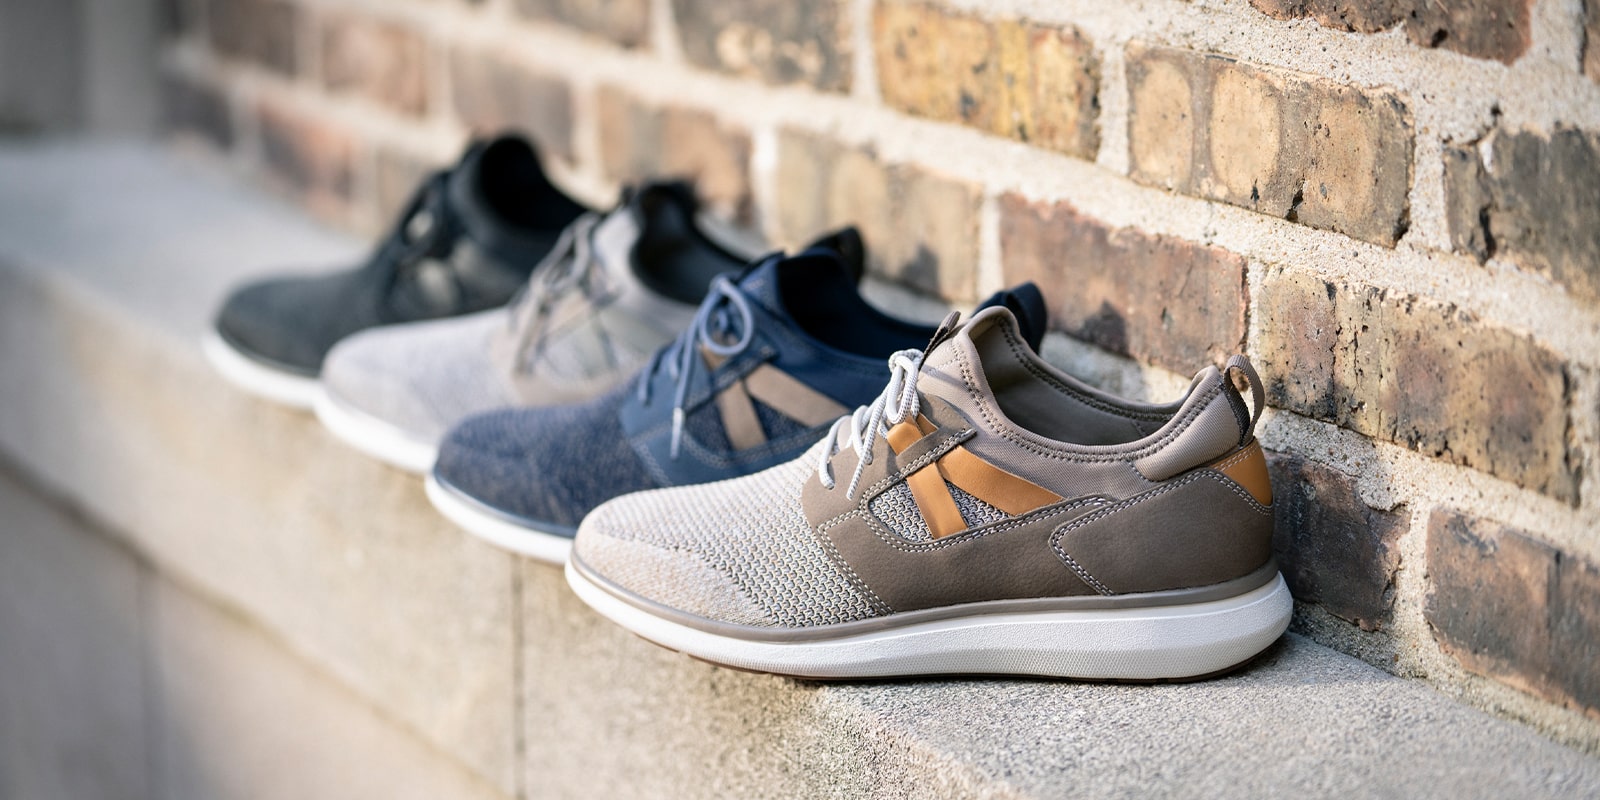 The featured products are the Venture Knit Plain Toe Lace Up Sneakers in Mushroom, Navy, Gray, and Black.